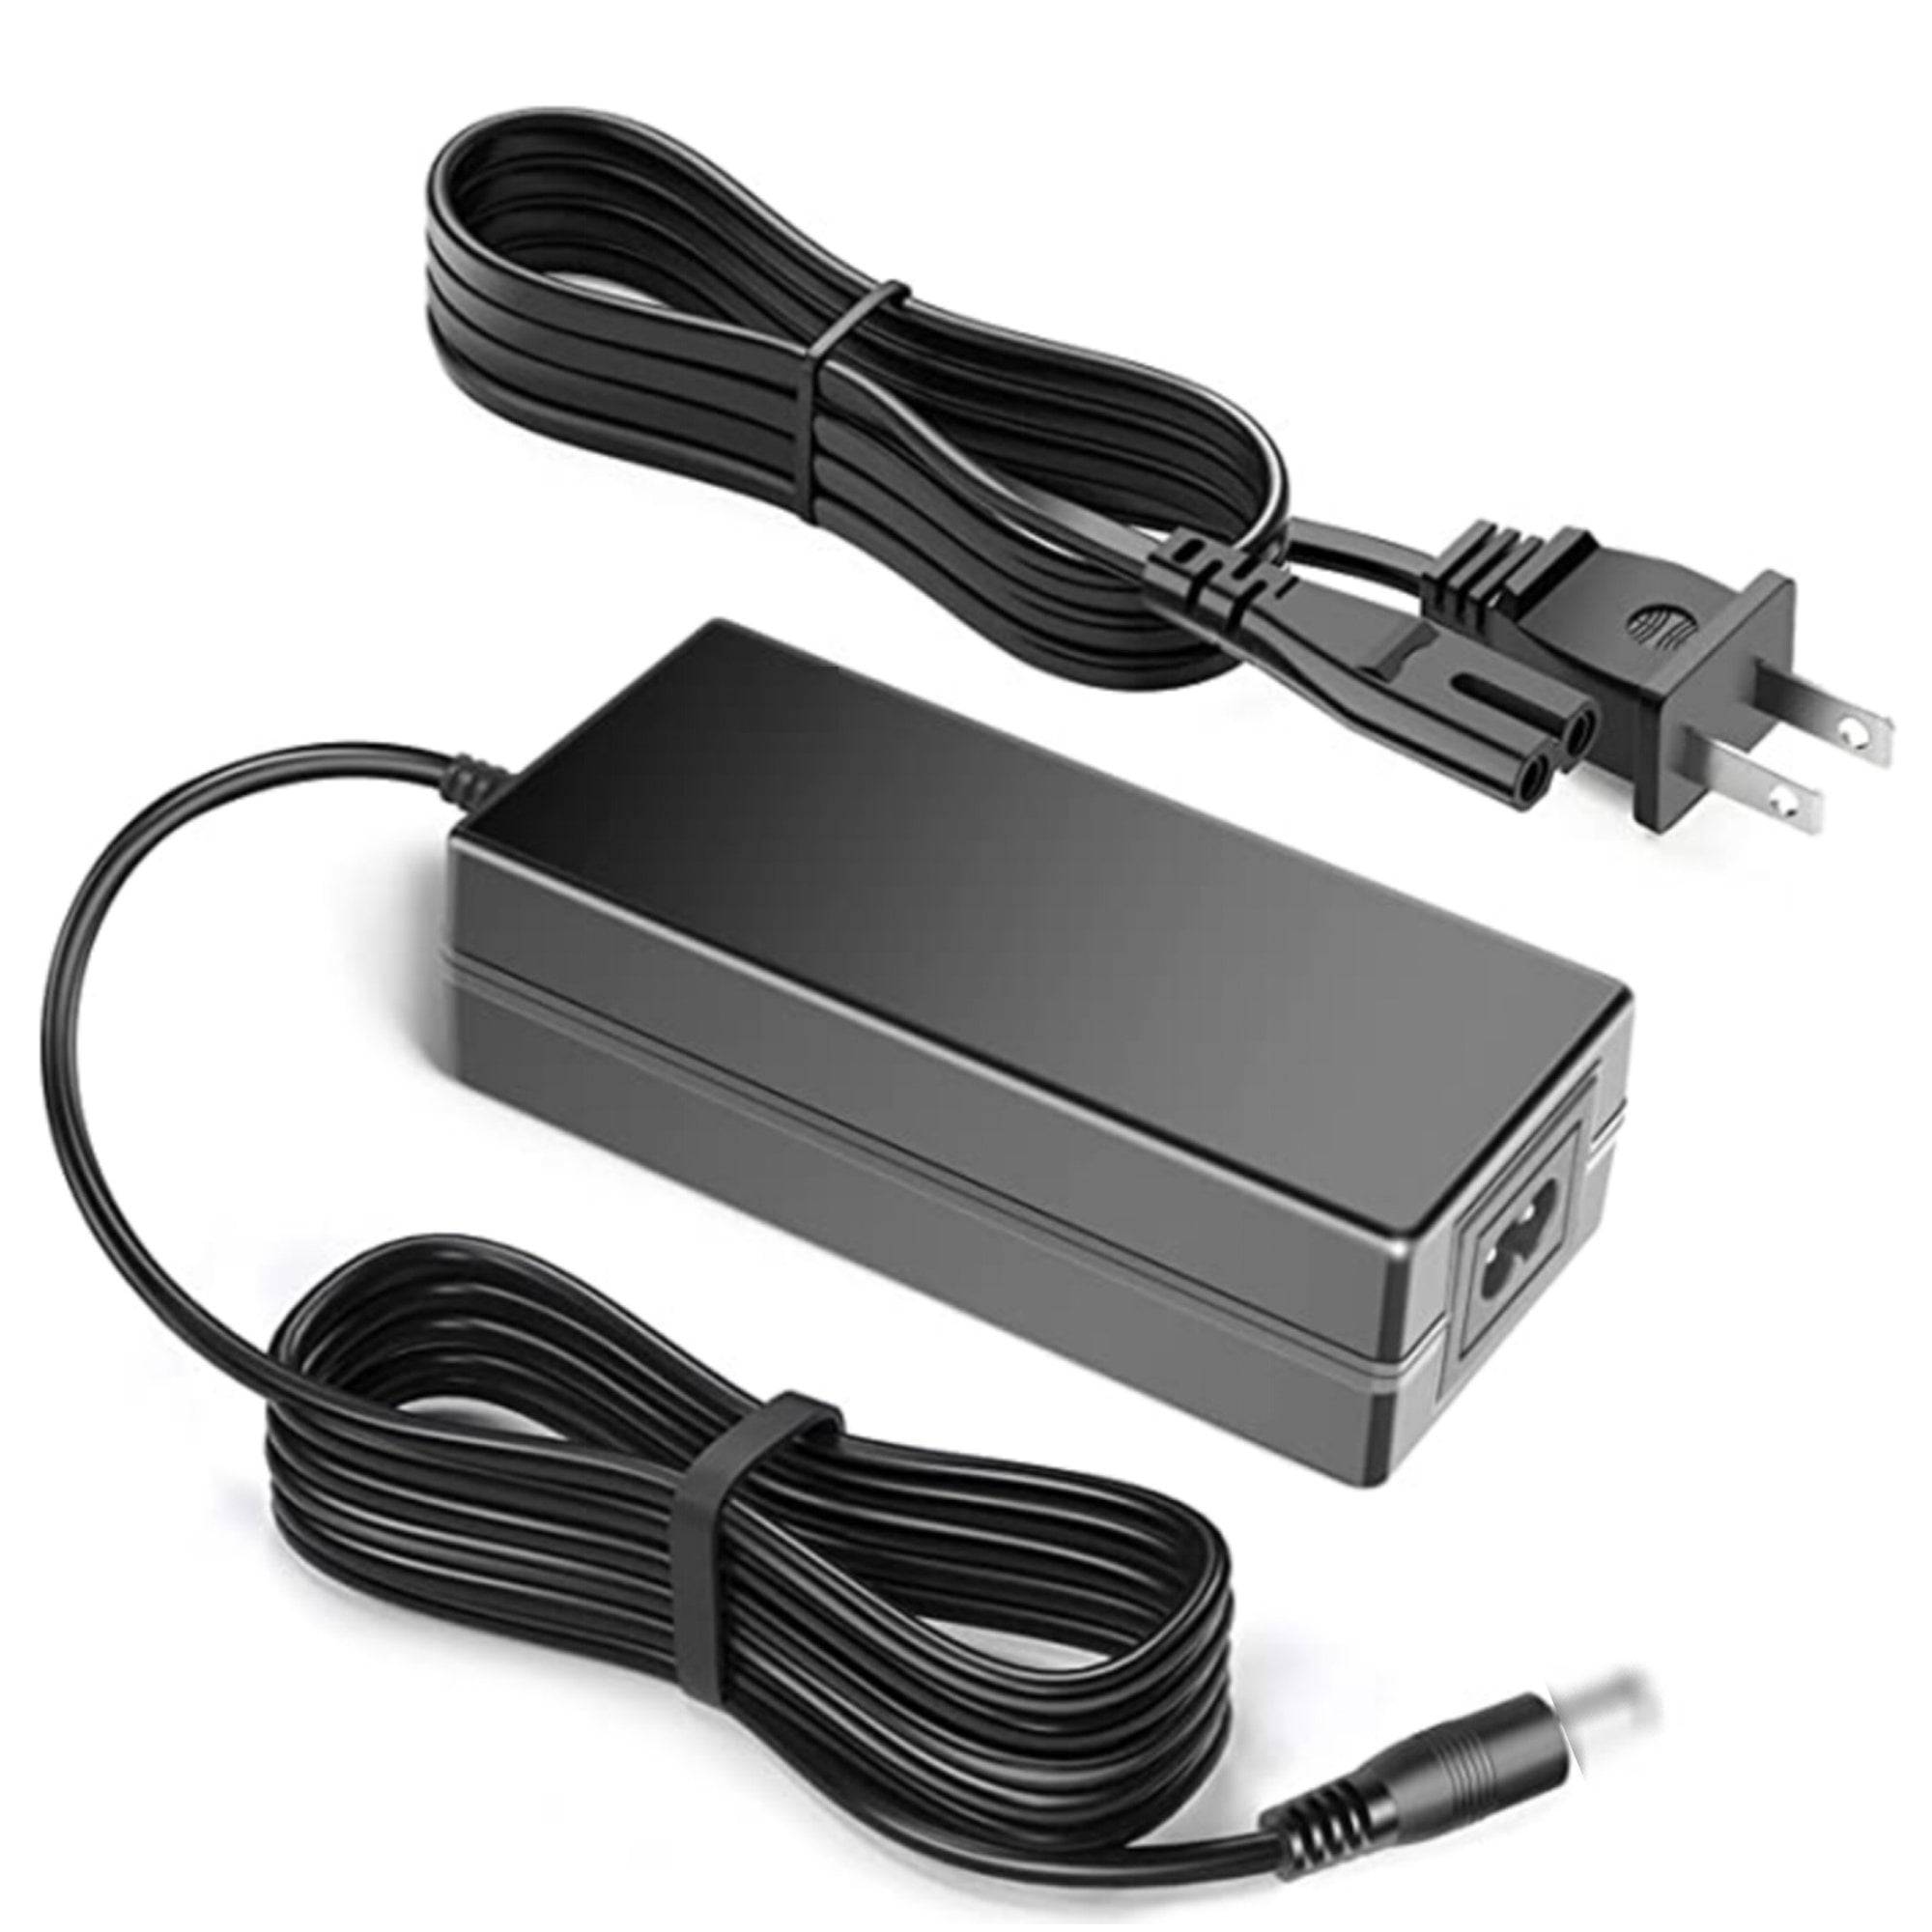 AC/DC Adapter Charger for Siemens CMTC1515 15